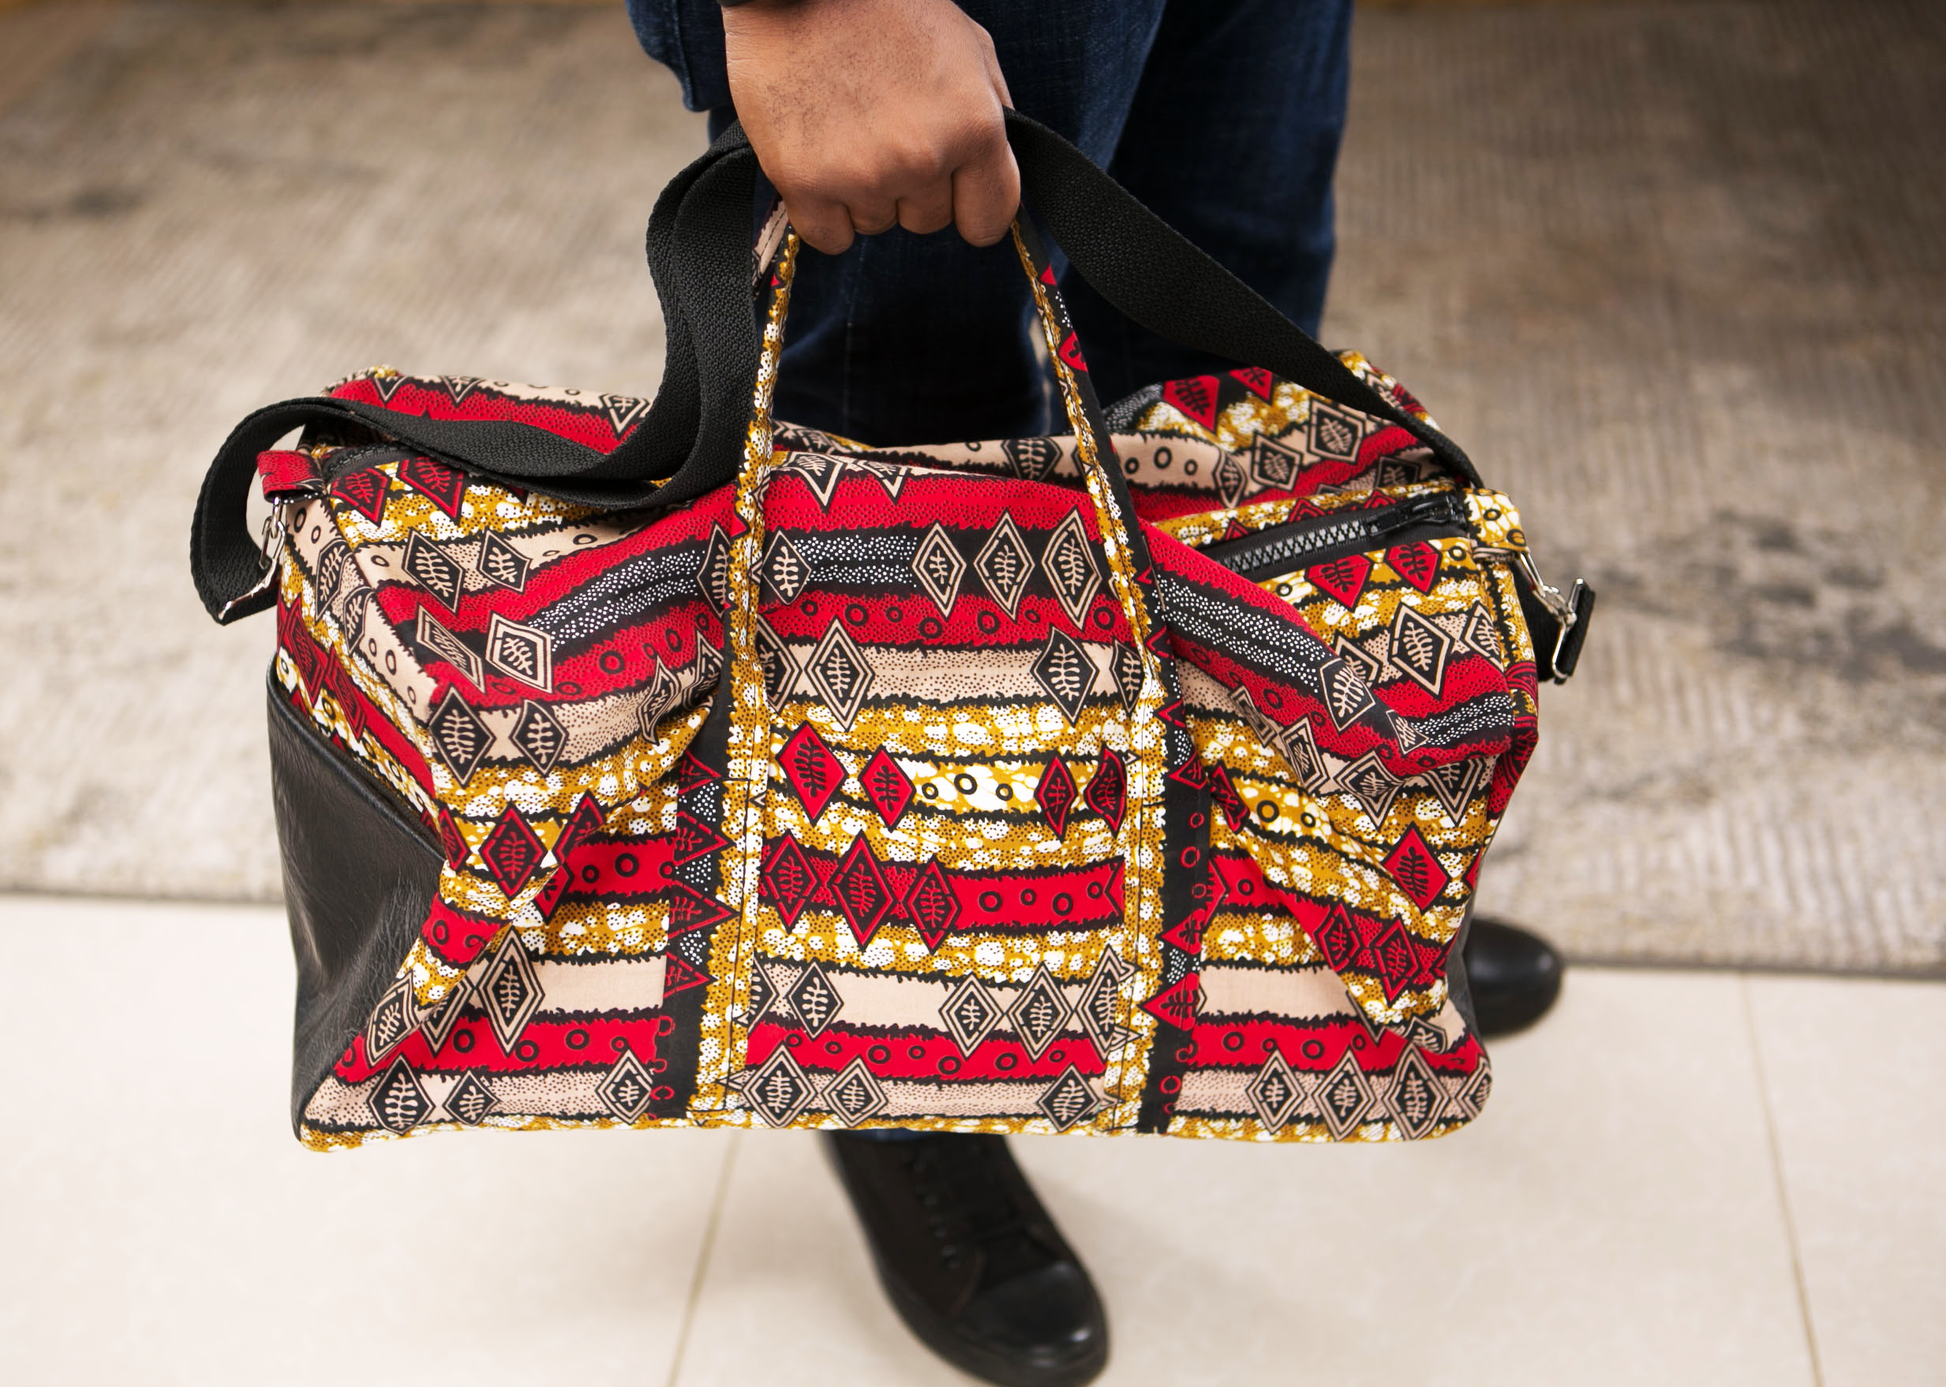 Unisex Ankara Travel bag - Authentic African handicrafts | Clothing, bags, painting, toys & more - CULTURE HUB by Muthoni Unchained